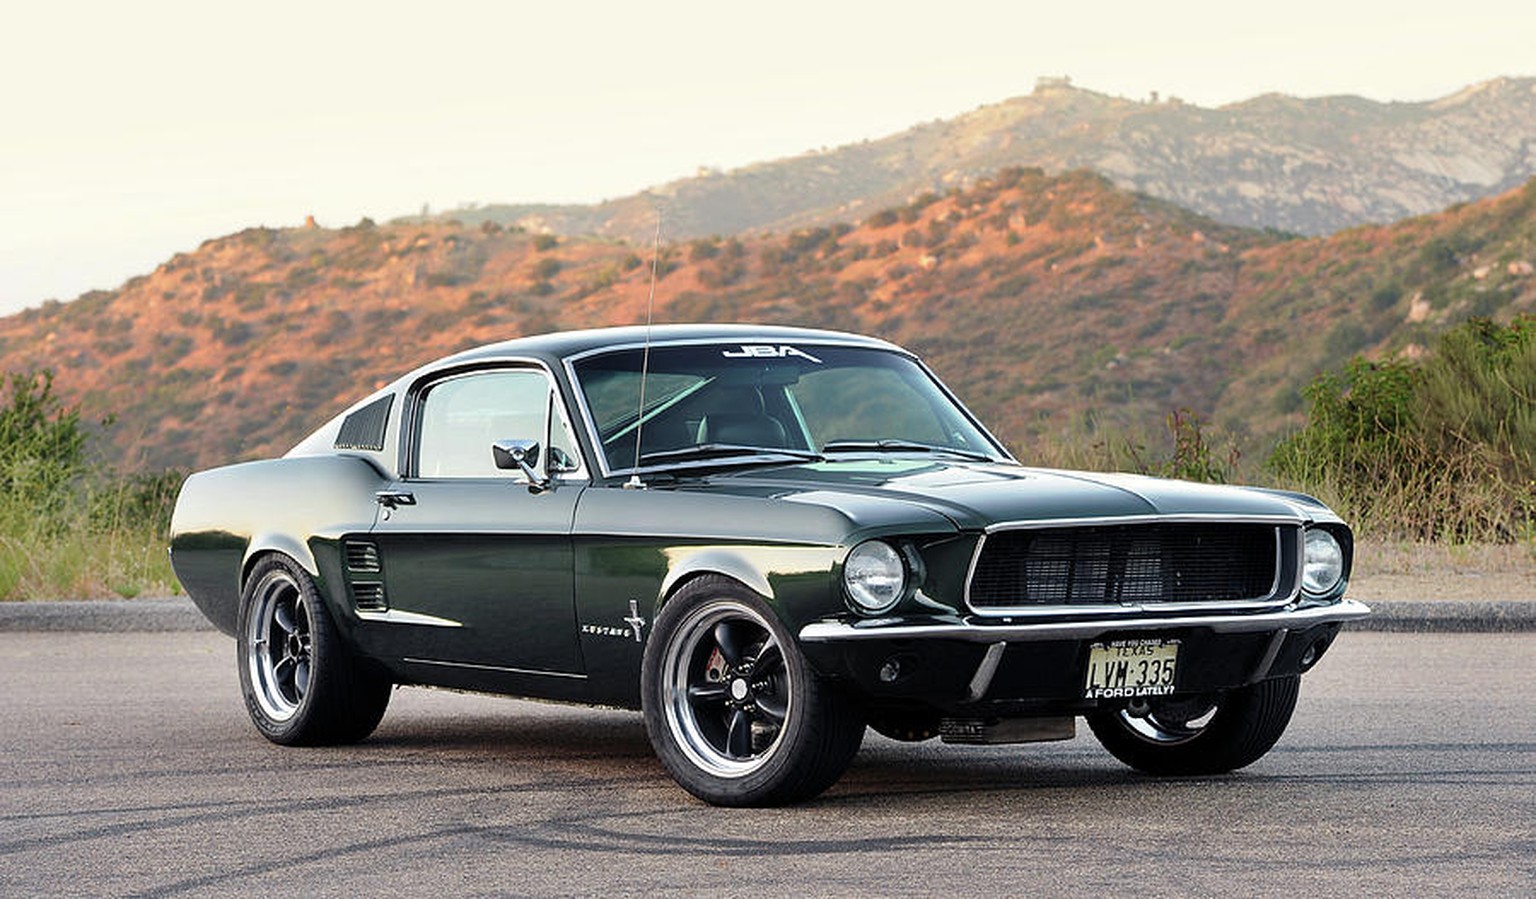 1968 ford mustang fastback bullit auto pony car retro motor https://pixels.com/featured/1968-ford-mustang-fastback-drew-phillips.html